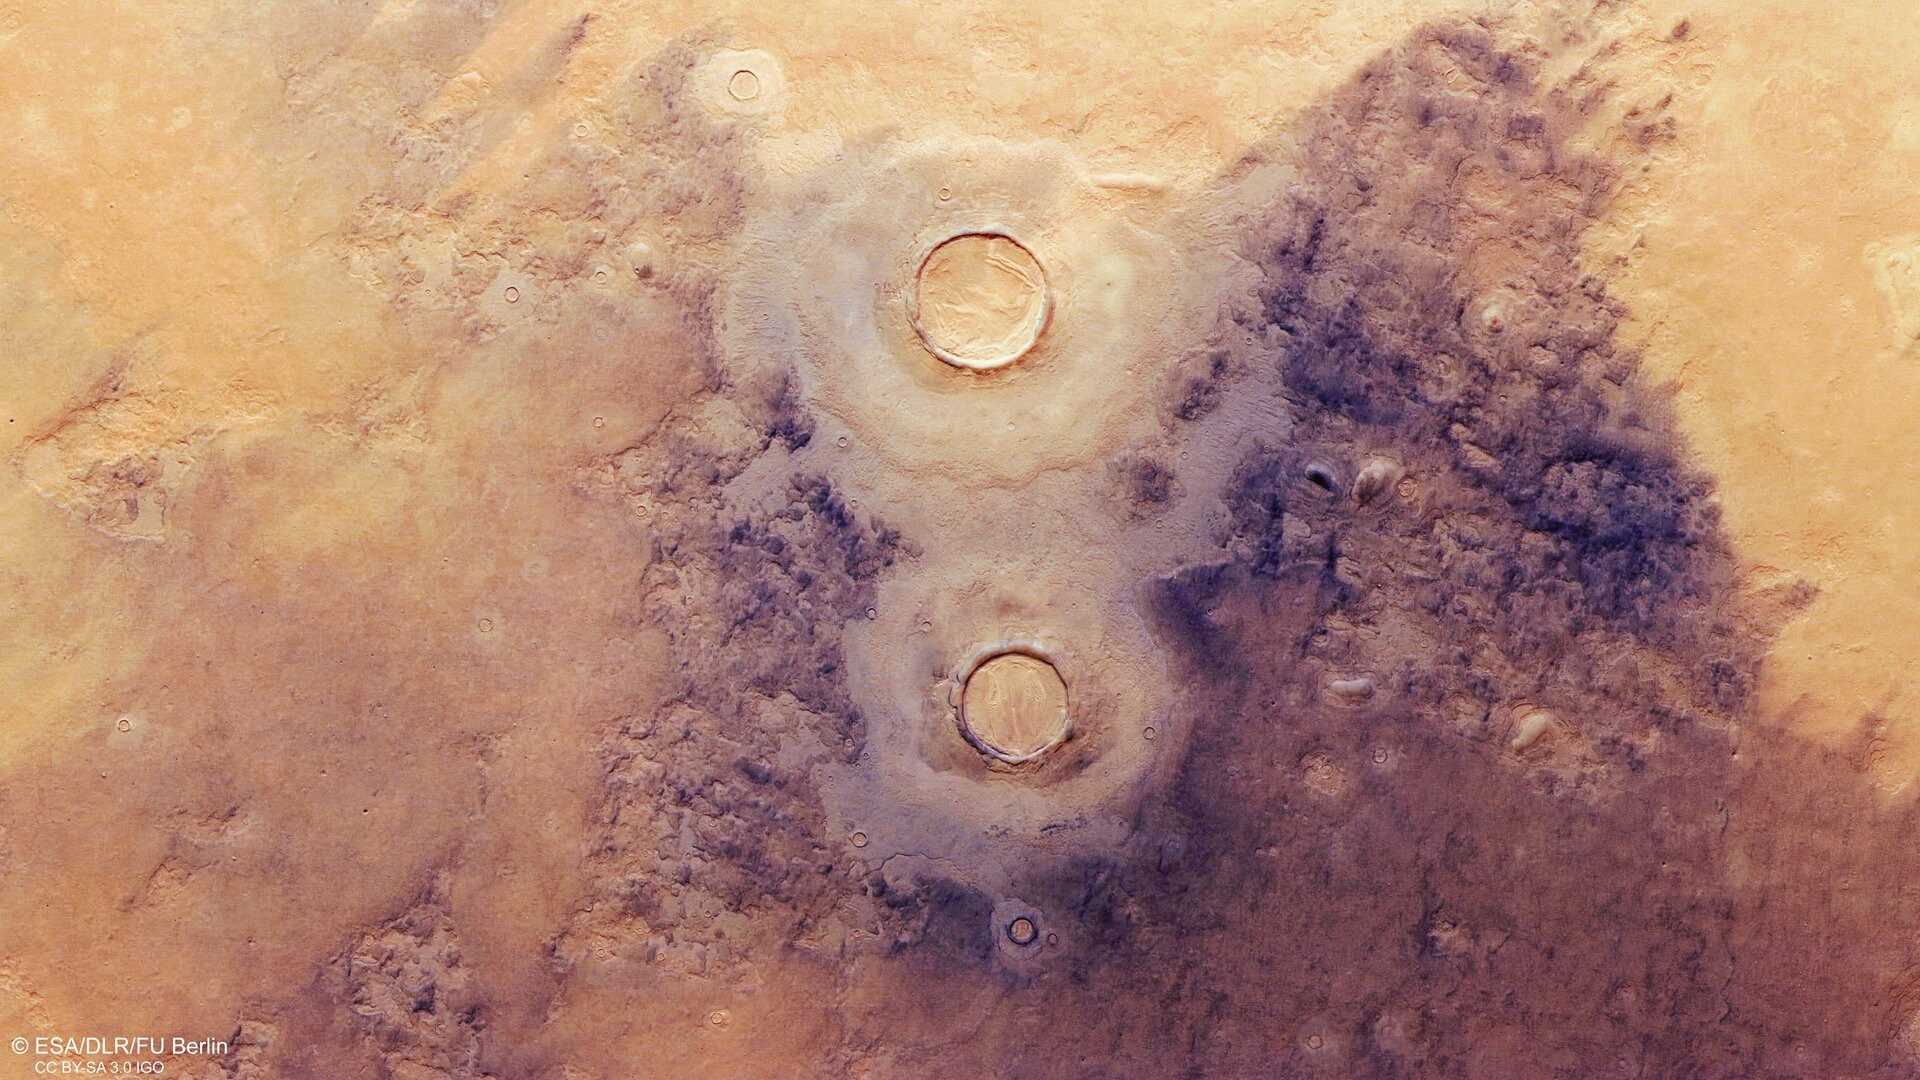 A plan view of Utopia Planitia on Mars, based on the European Space Agency's Mars Express data.